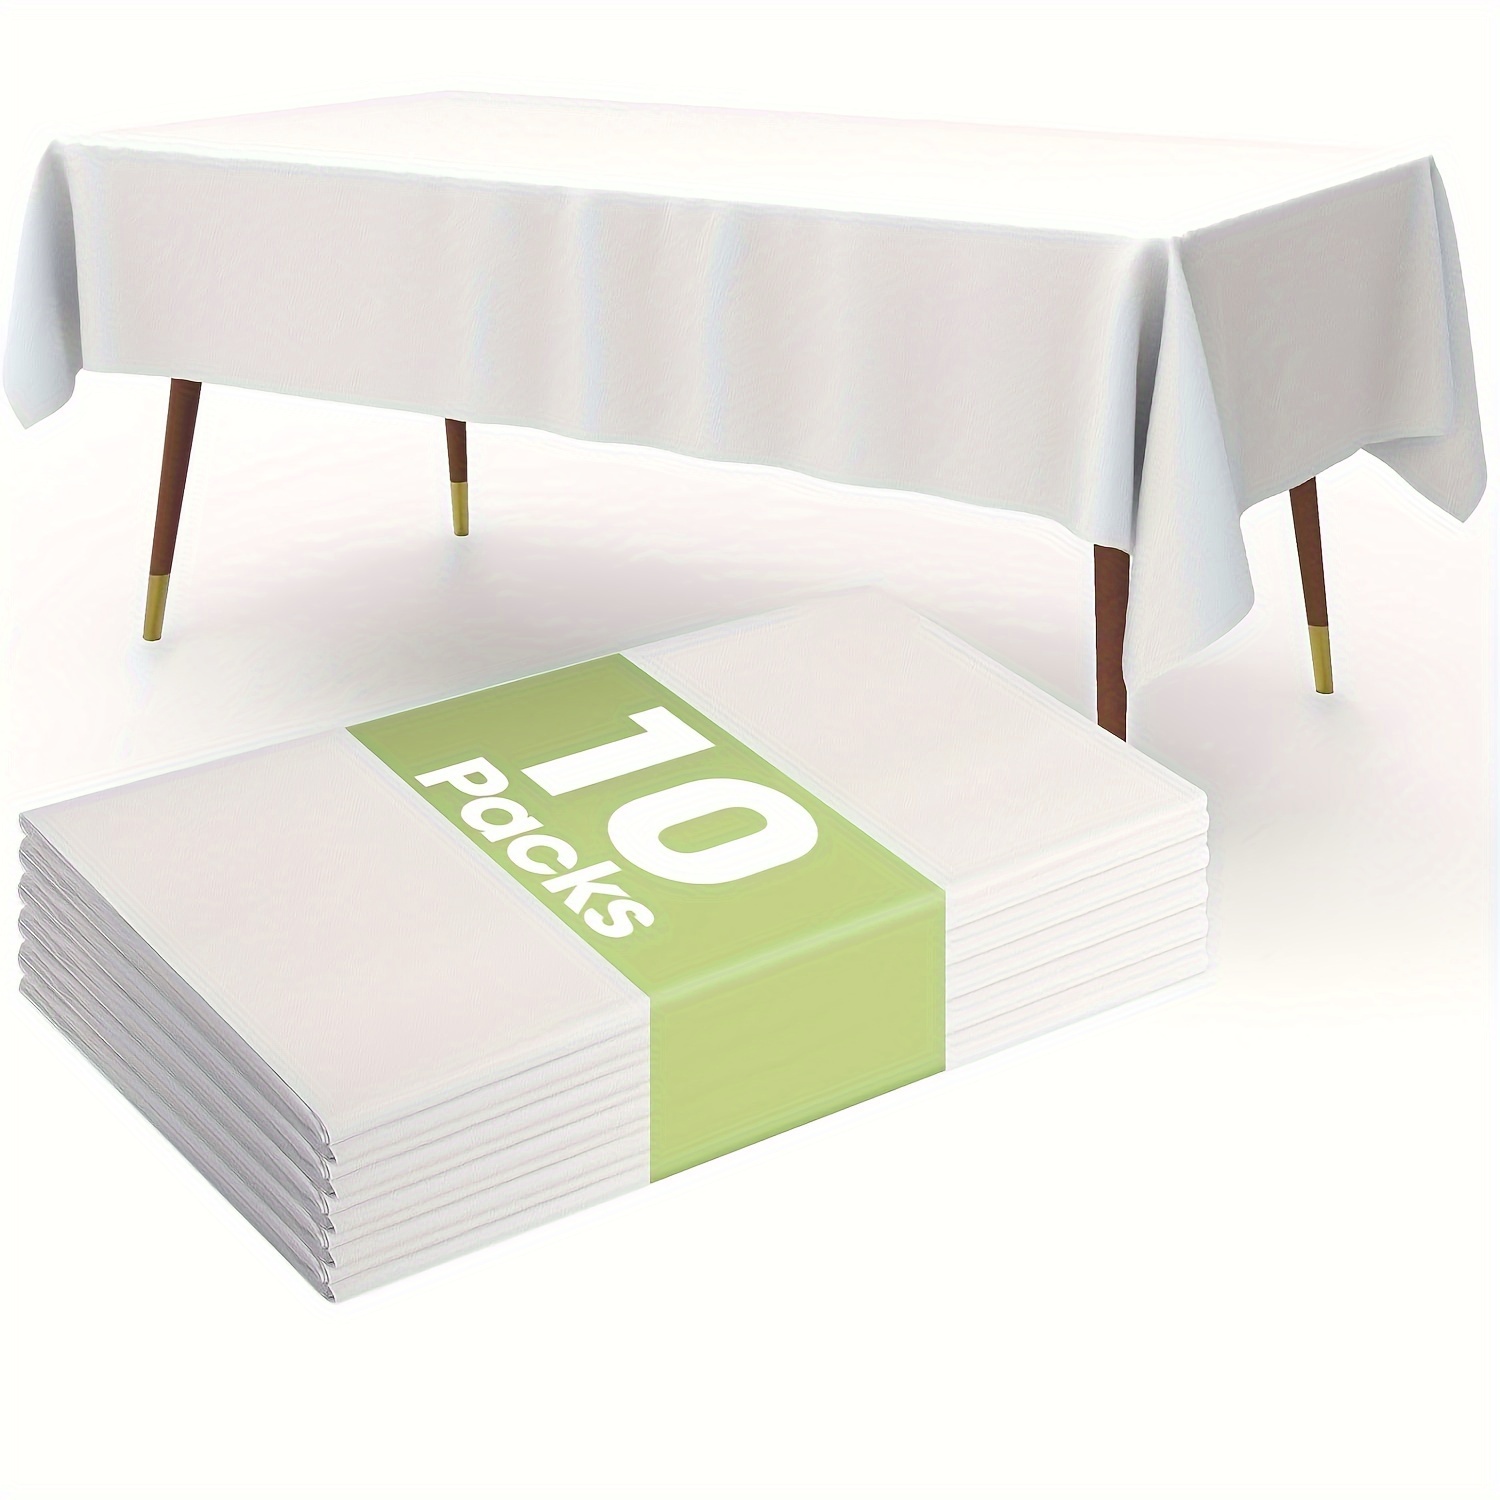 

Premium Disposable Table Cloth, Table Cloths For Parties, Decorative Tablecloths For Rectangle Tables, White Plastic Table Cover, Leakproof & Sturdy